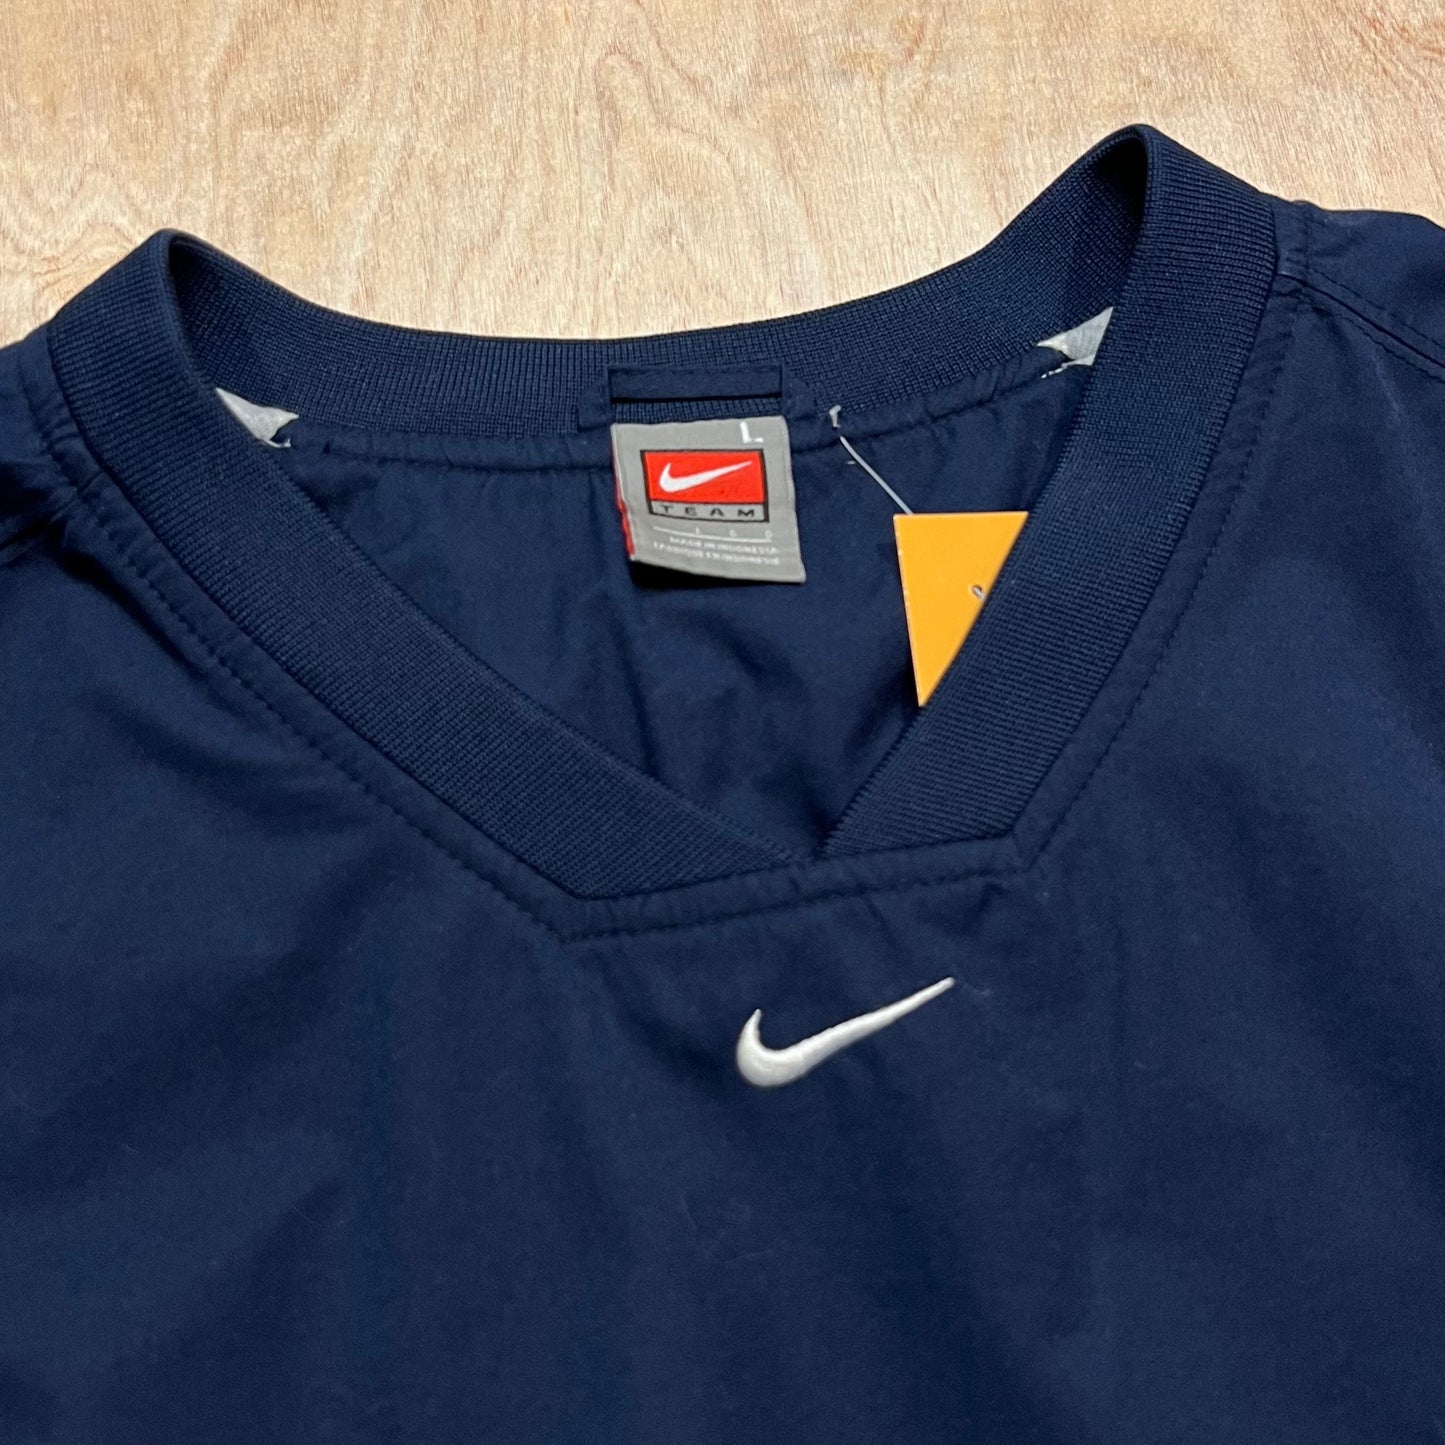 Vintage Center Swoosh Insulated Nike Pullover